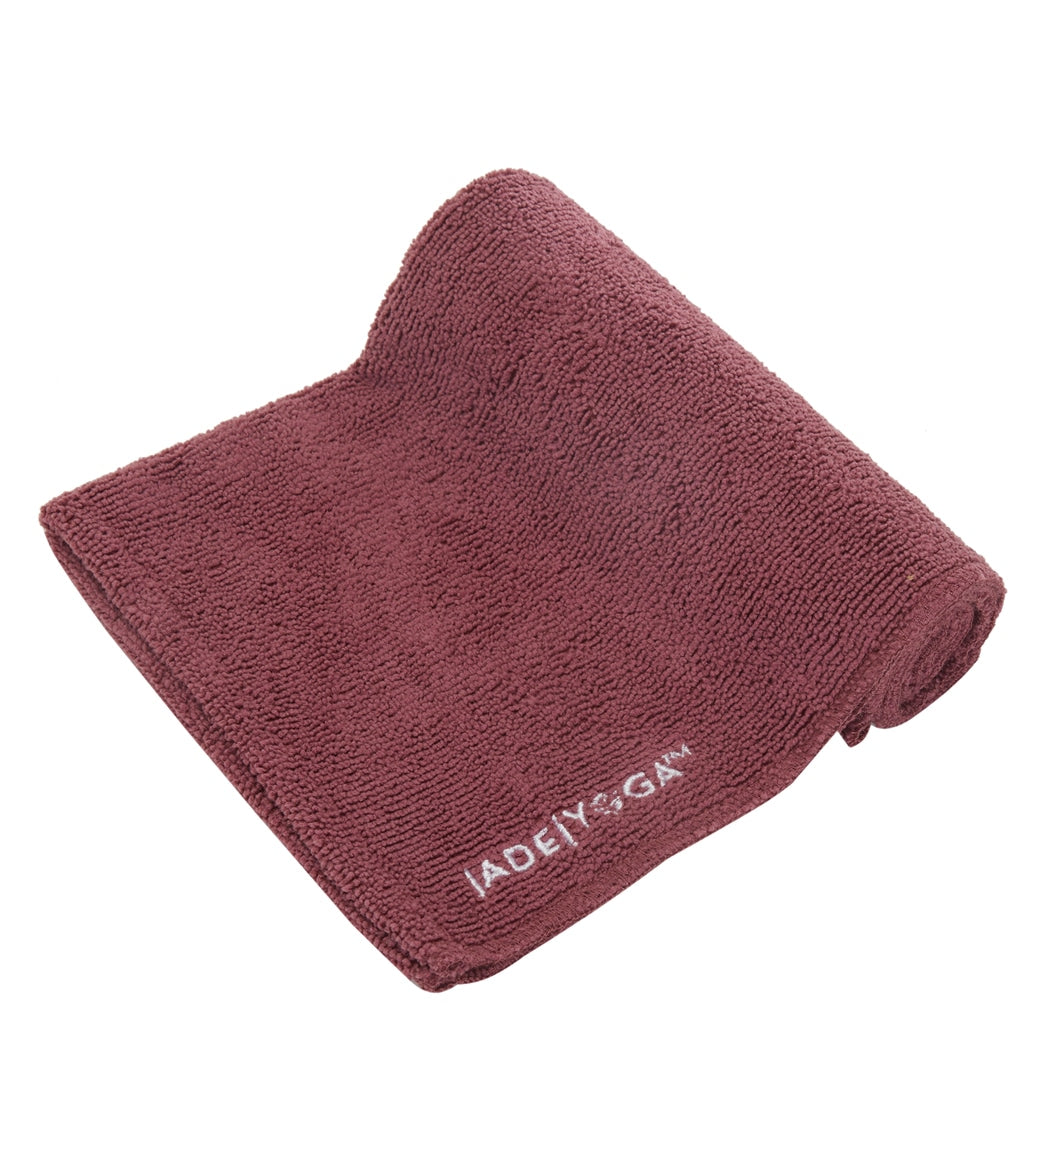 Yoga Hand Towel - Absorbent Towel & Towel for Yoga for better practices